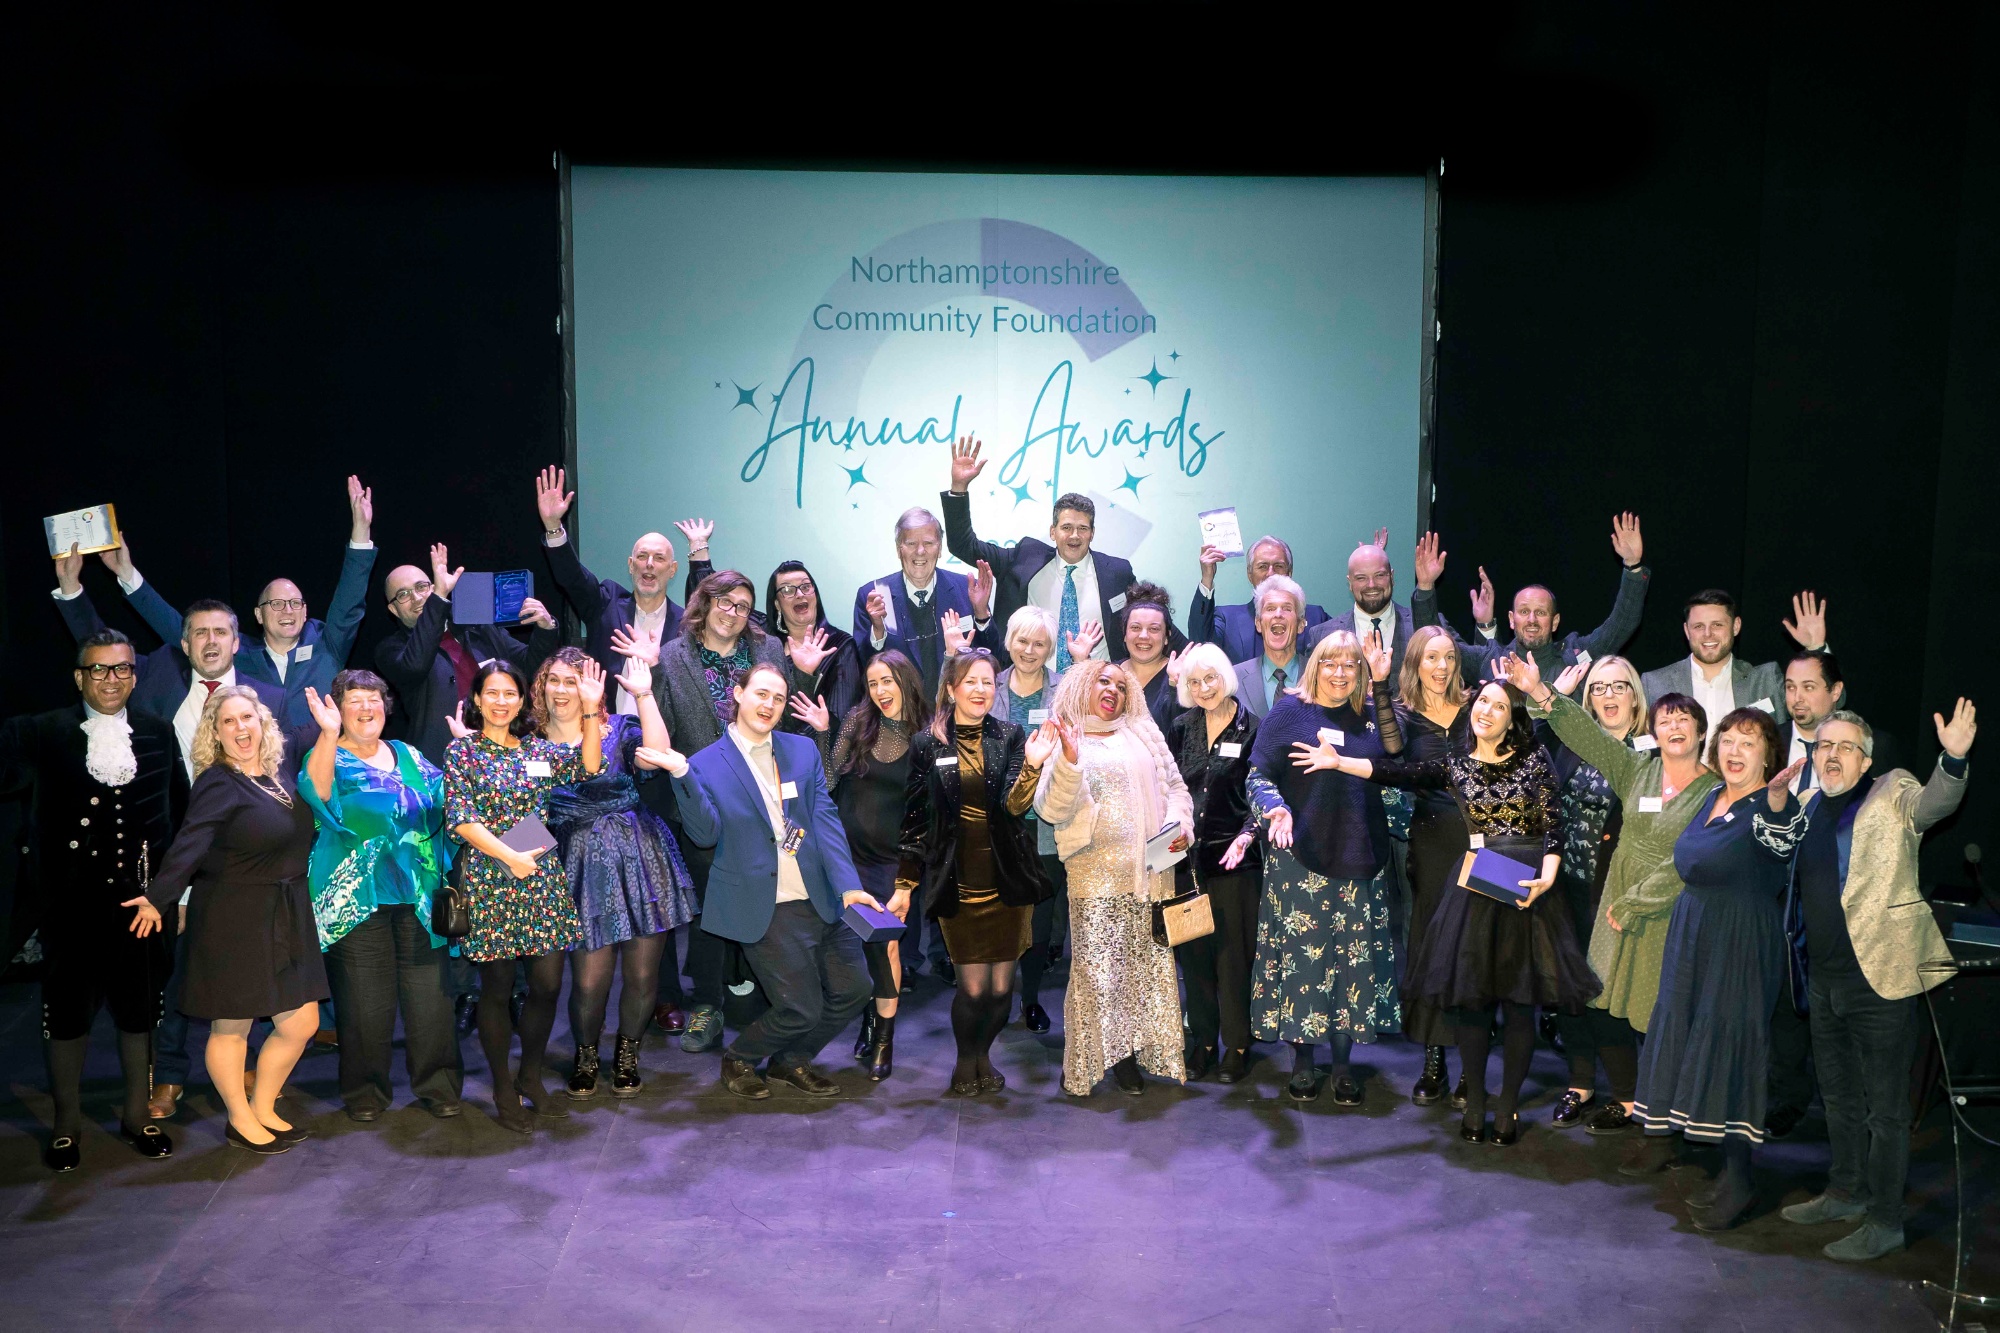 Award winners and judges celebrating on stage at the Royal Theatre